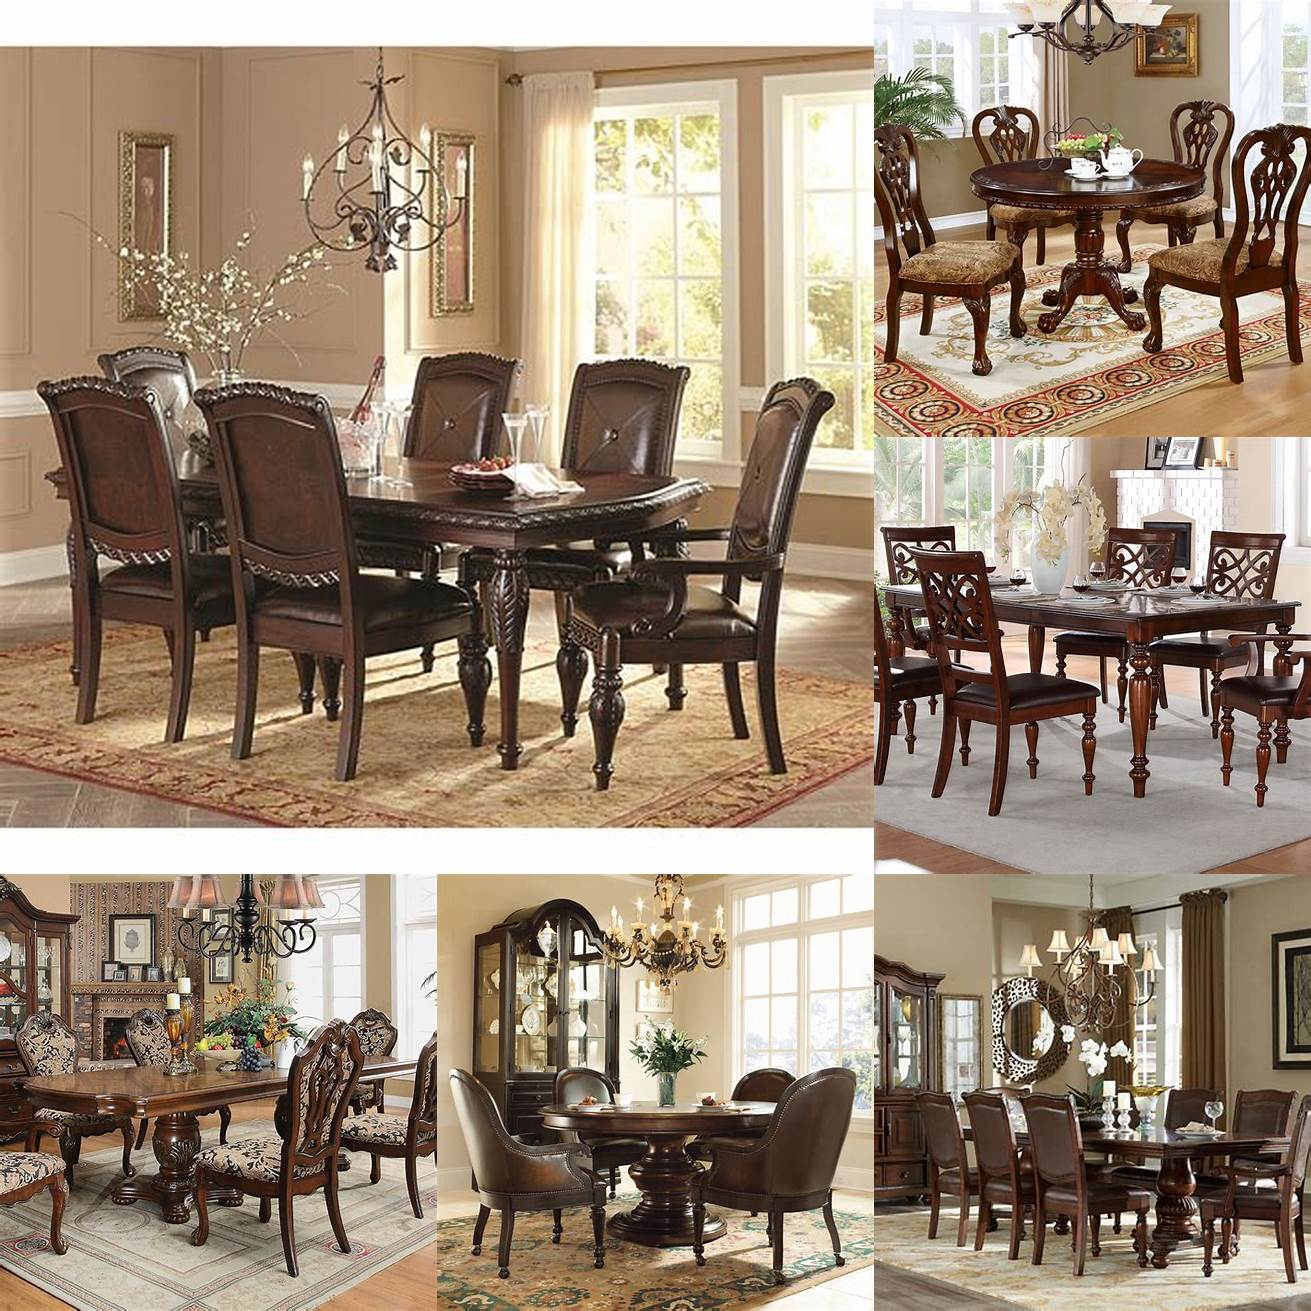 A traditional dining table set